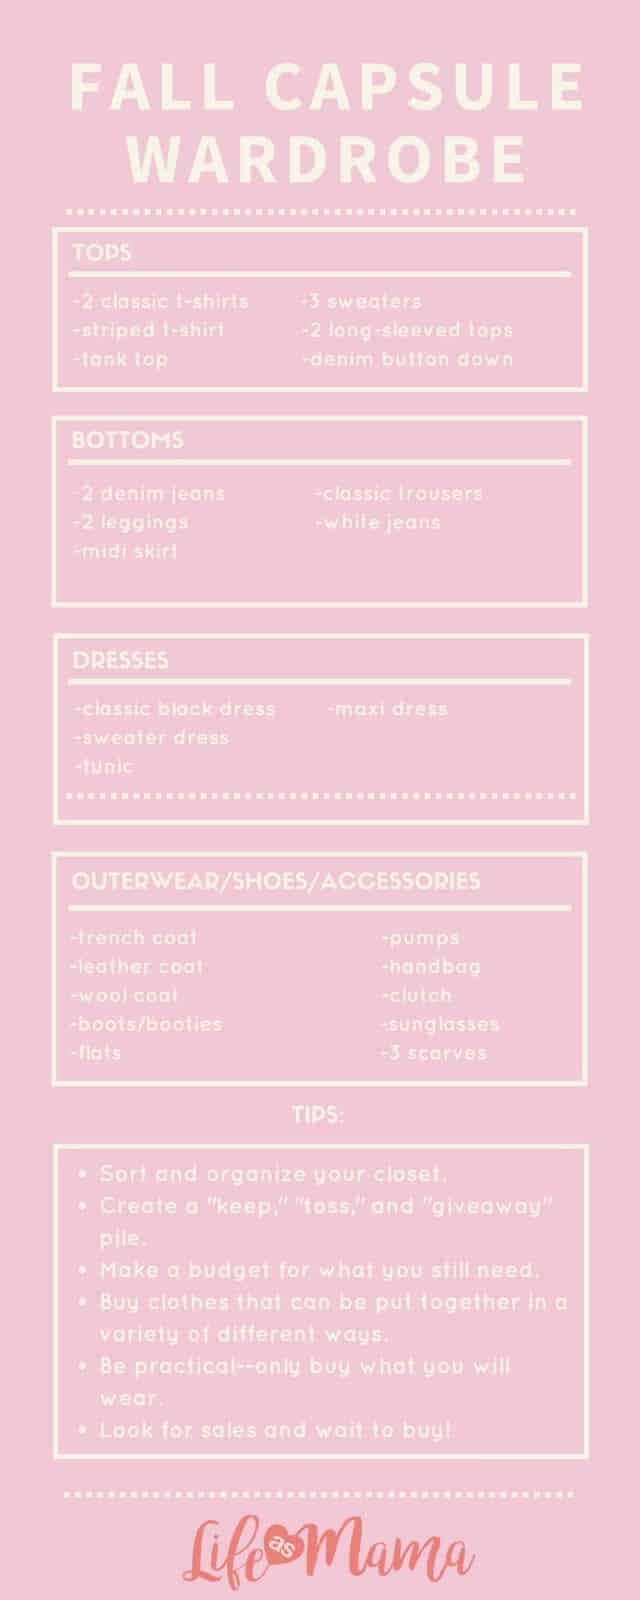 Copy-of-FOr-Kids-Capsule-Wardrobes-1